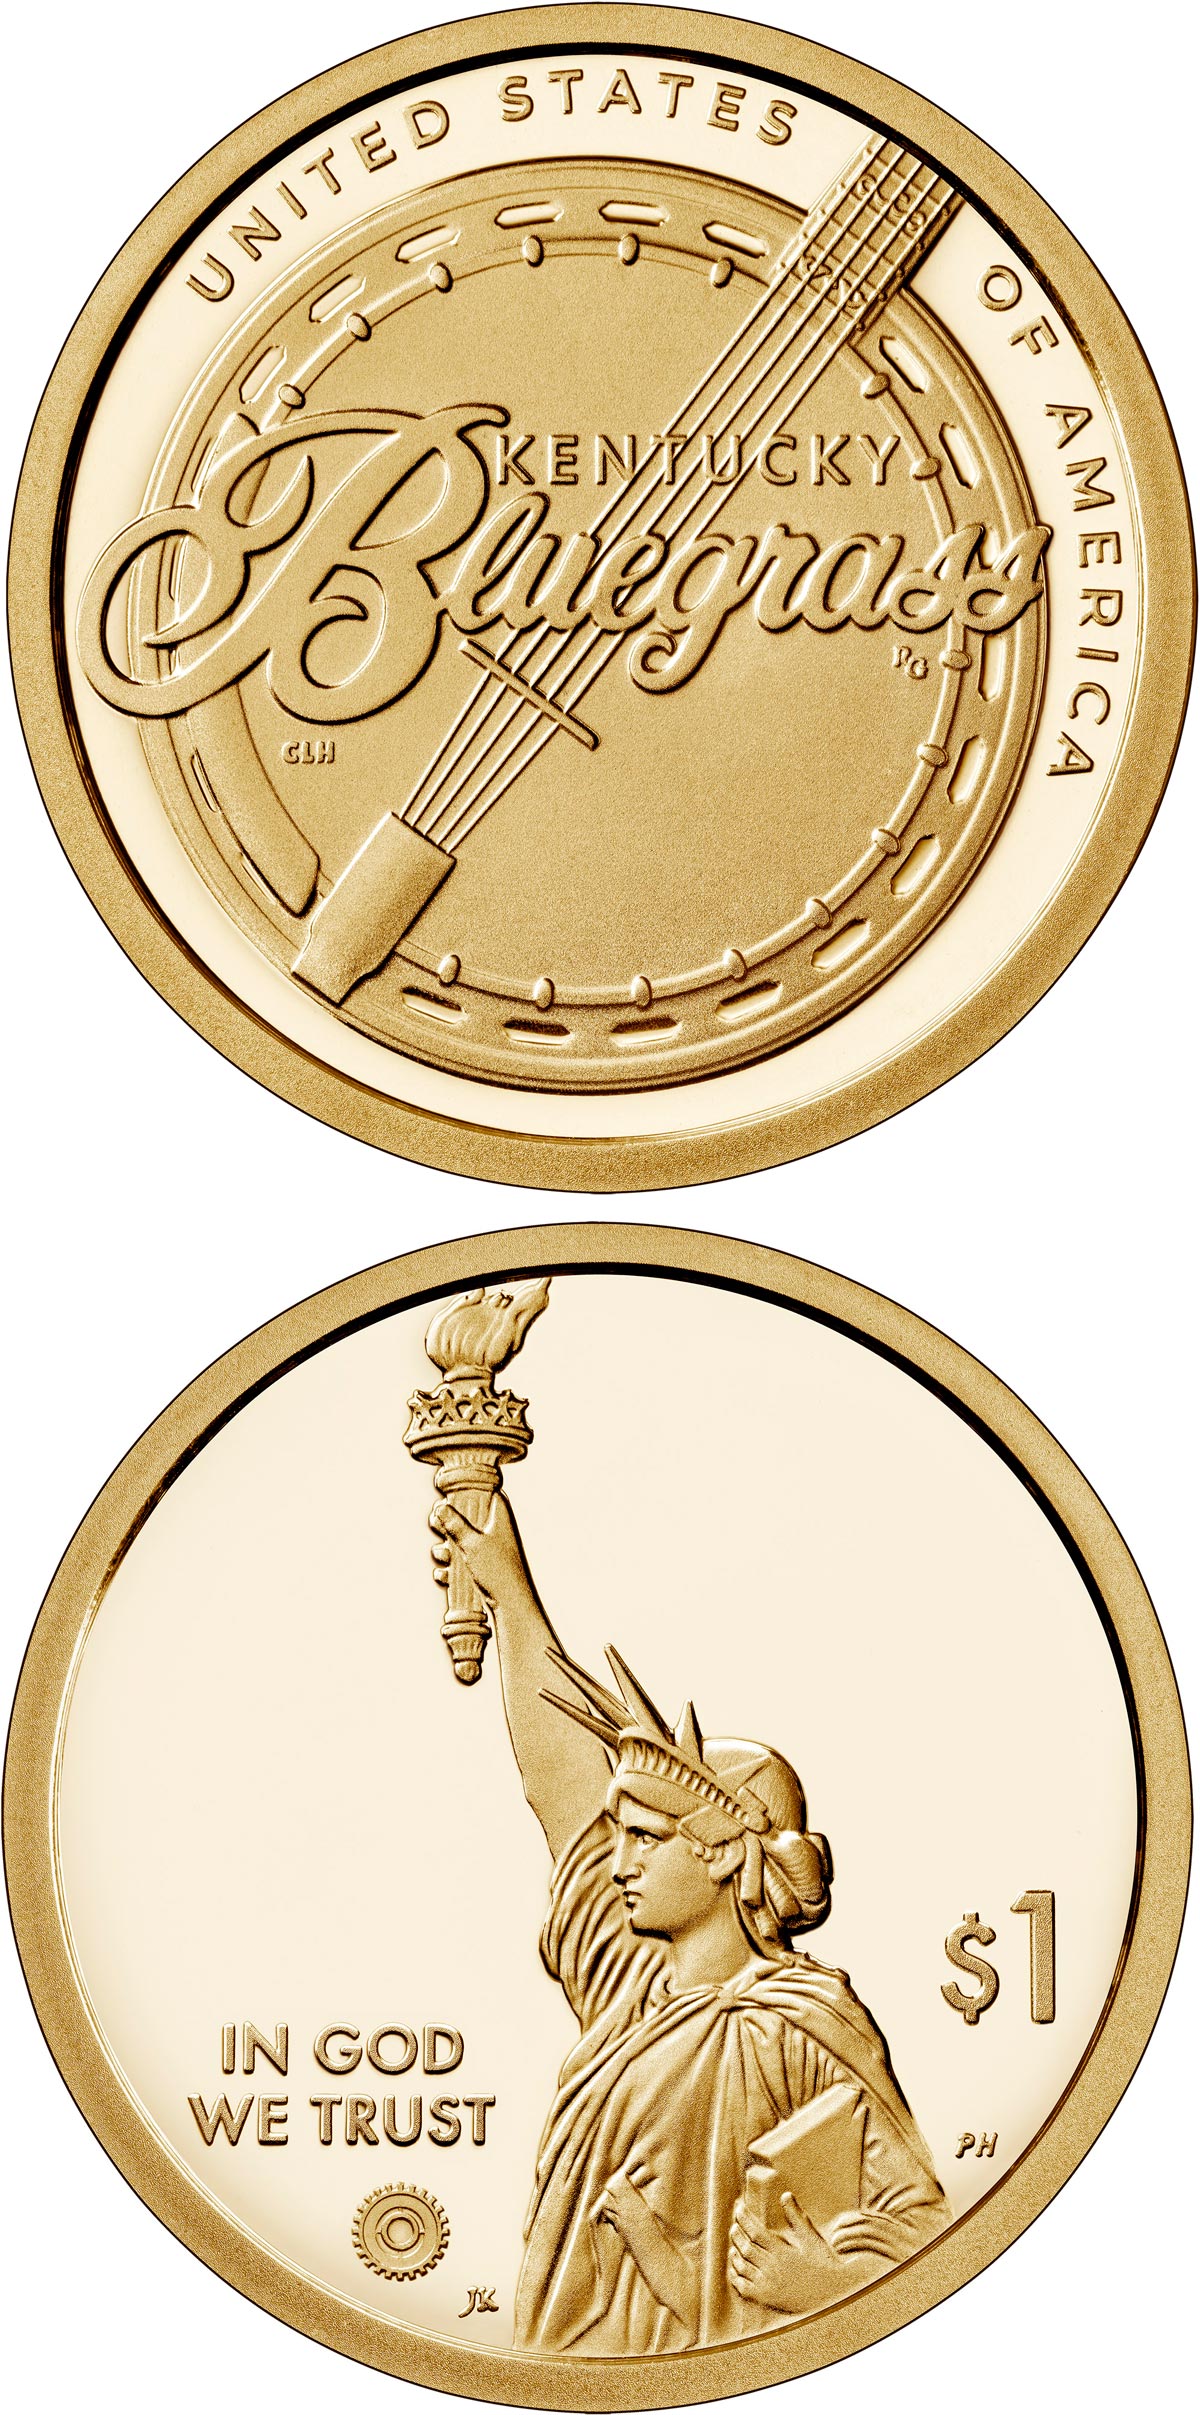 Image of 1 dollar coin - Kentucky - Bluegrass music | USA 2022.  The Nordic gold (CuZnAl) coin is of Proof, BU, UNC quality.